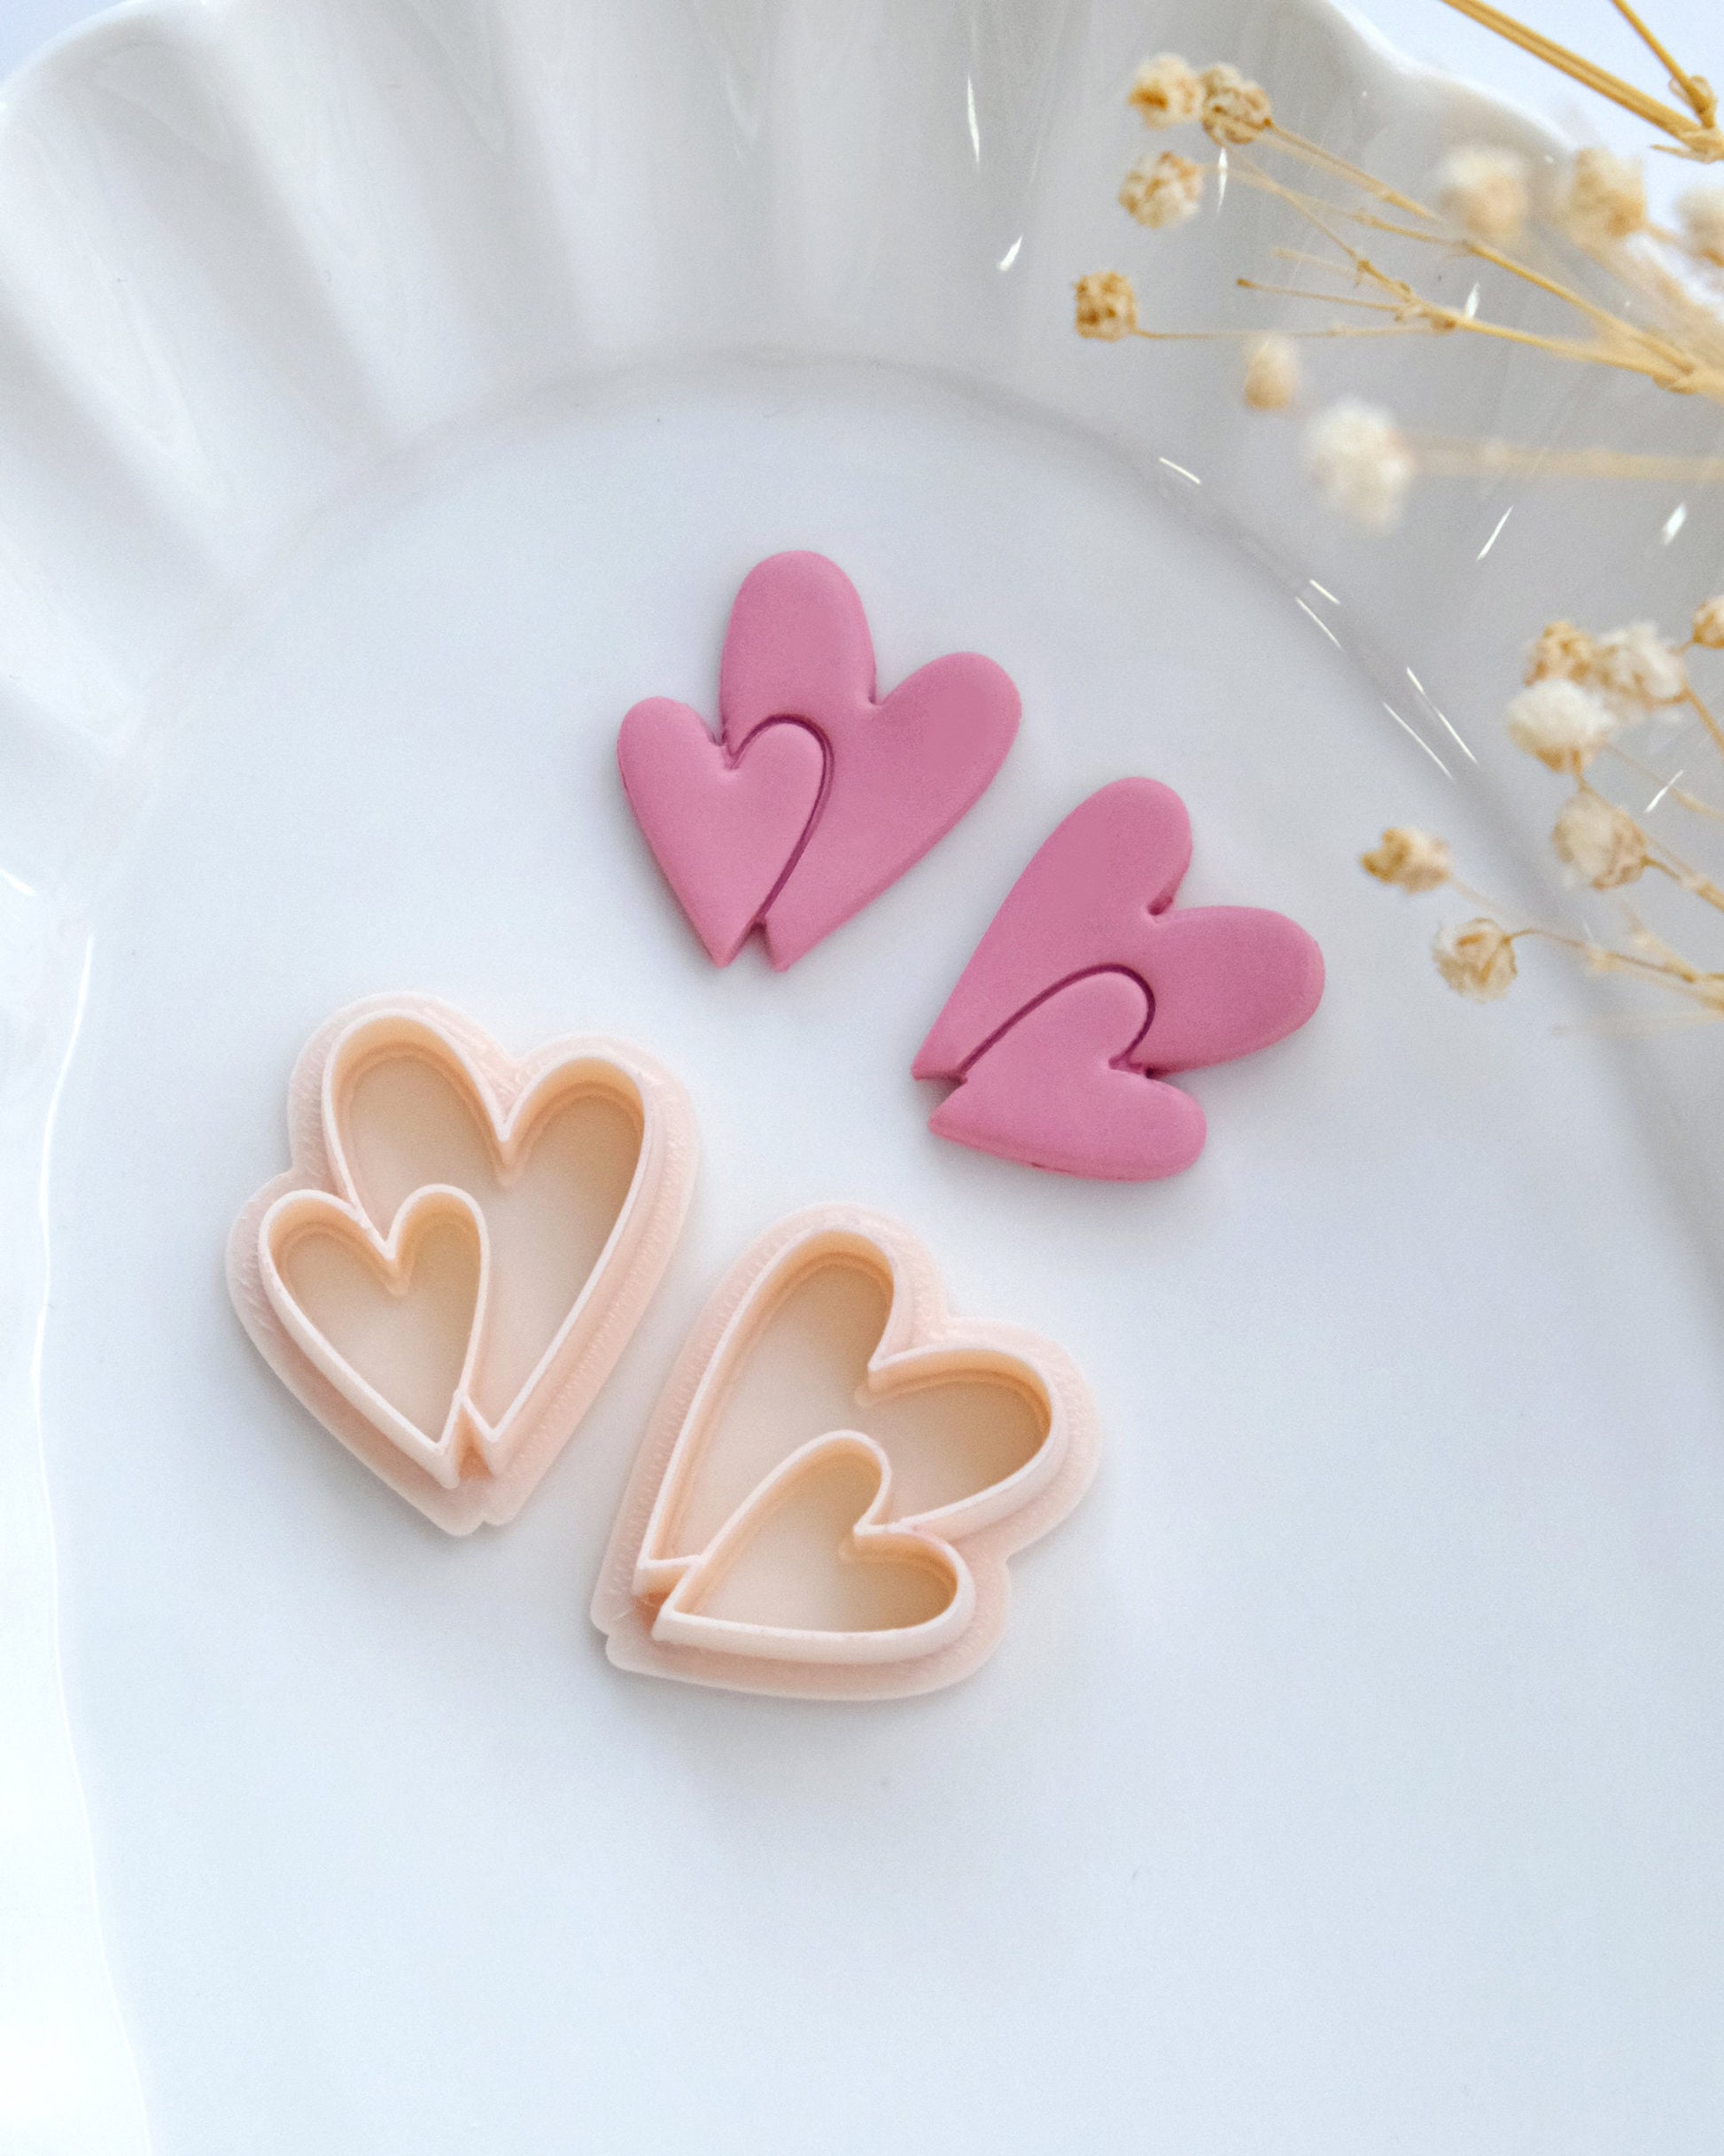 KEOKER Valentines day Heart Polymer Clay Cutters (10 Shapes)